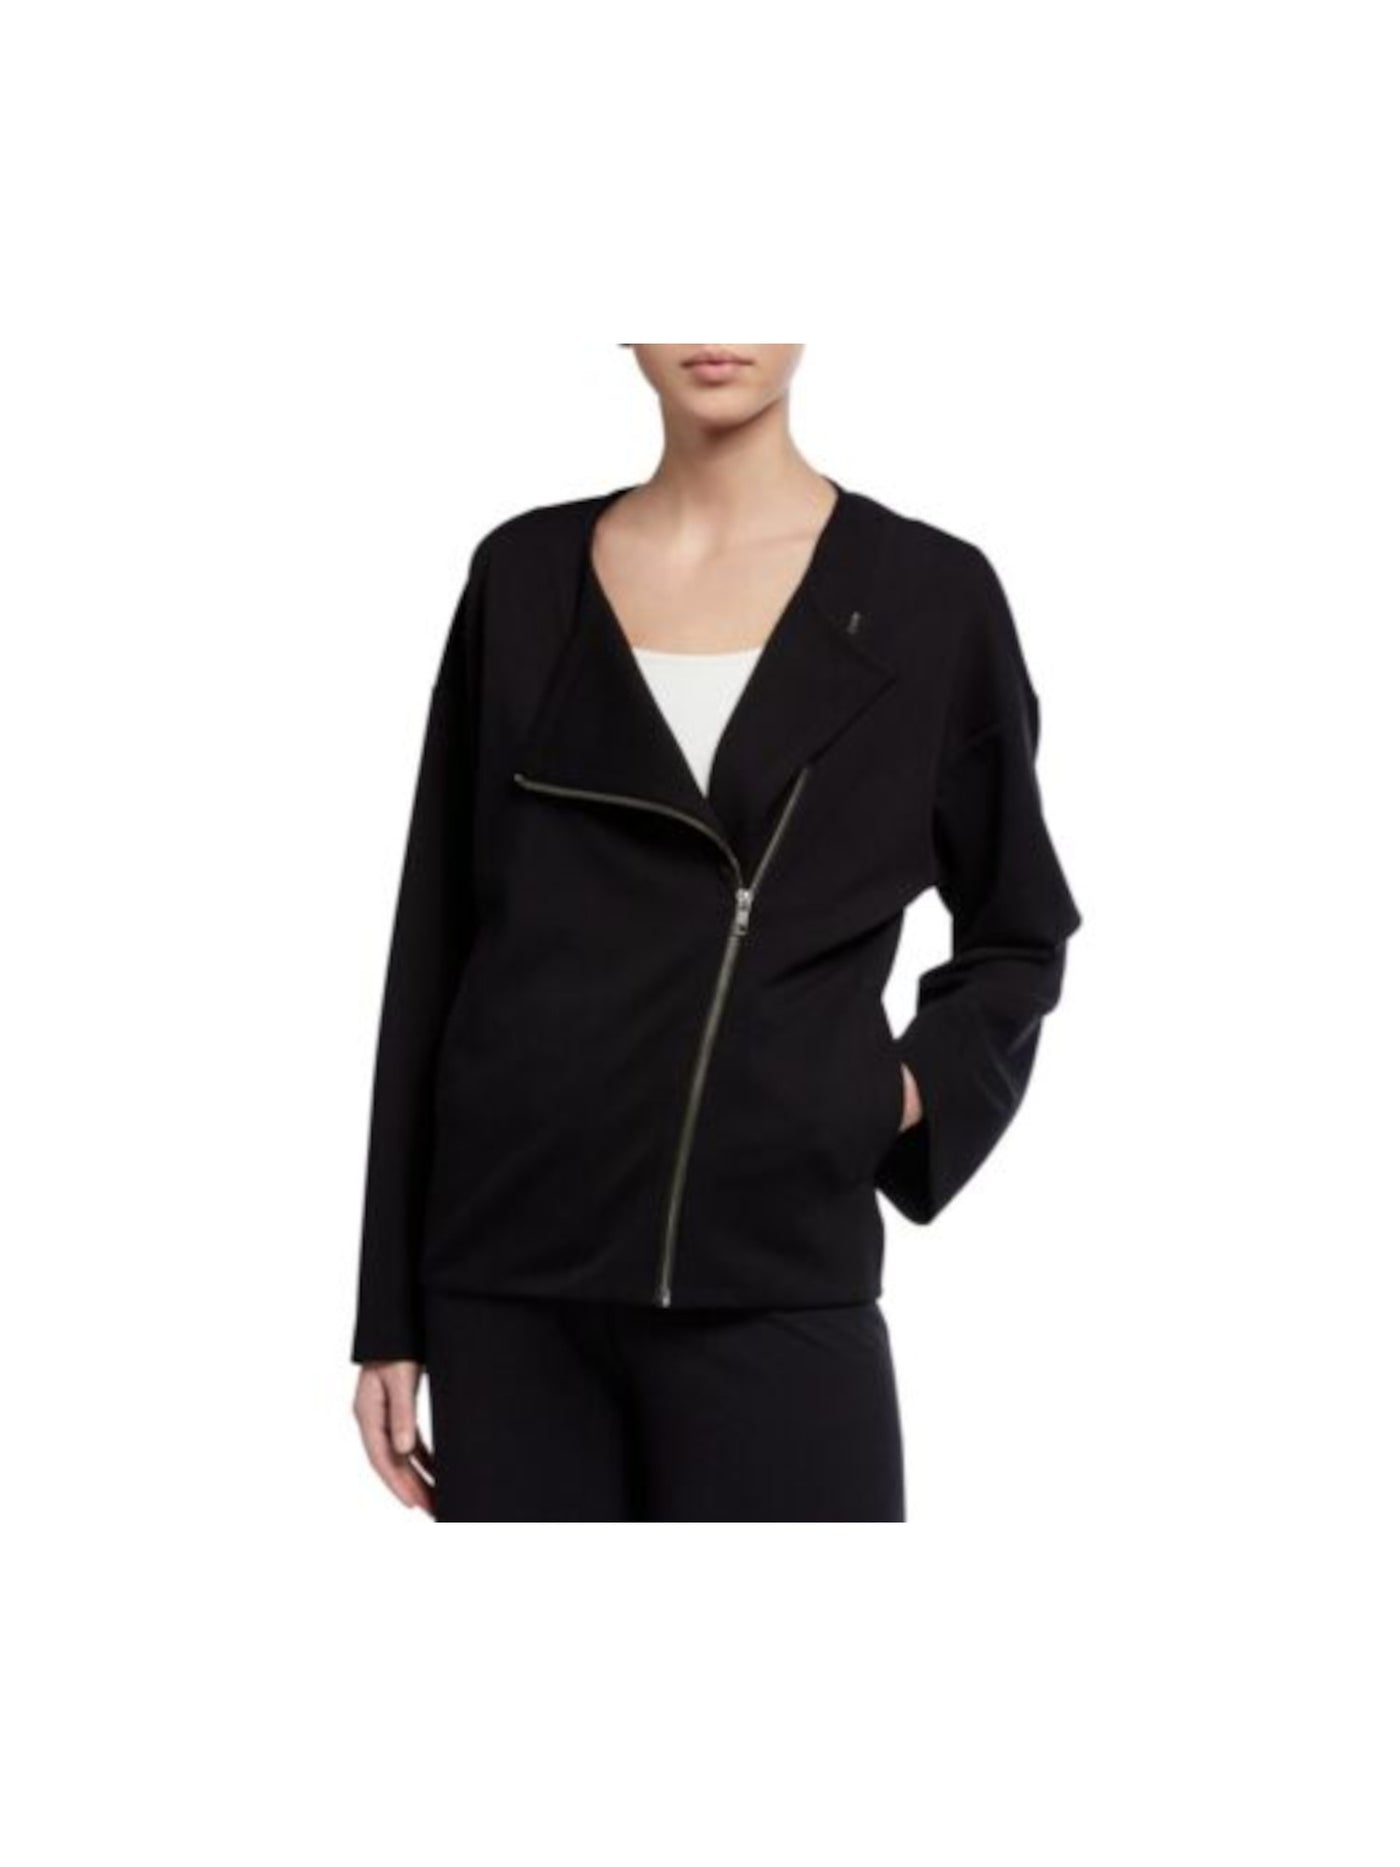 EILEEN FISHER Womens Black Zippered Pocketed Motorcycle Jacket XS